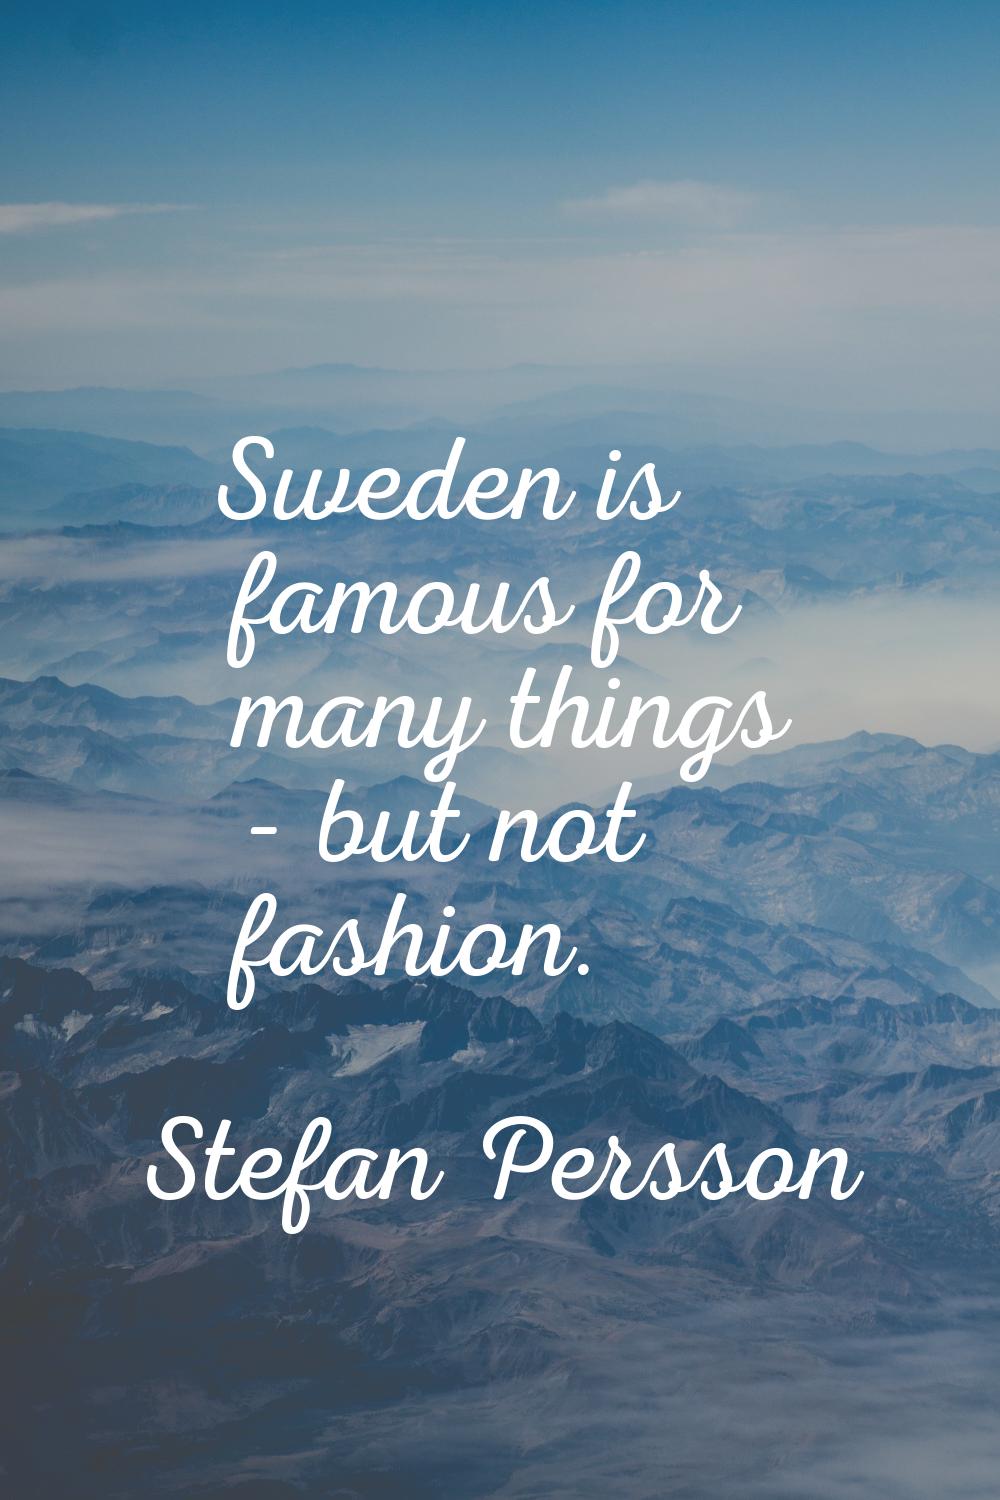 Sweden is famous for many things - but not fashion.